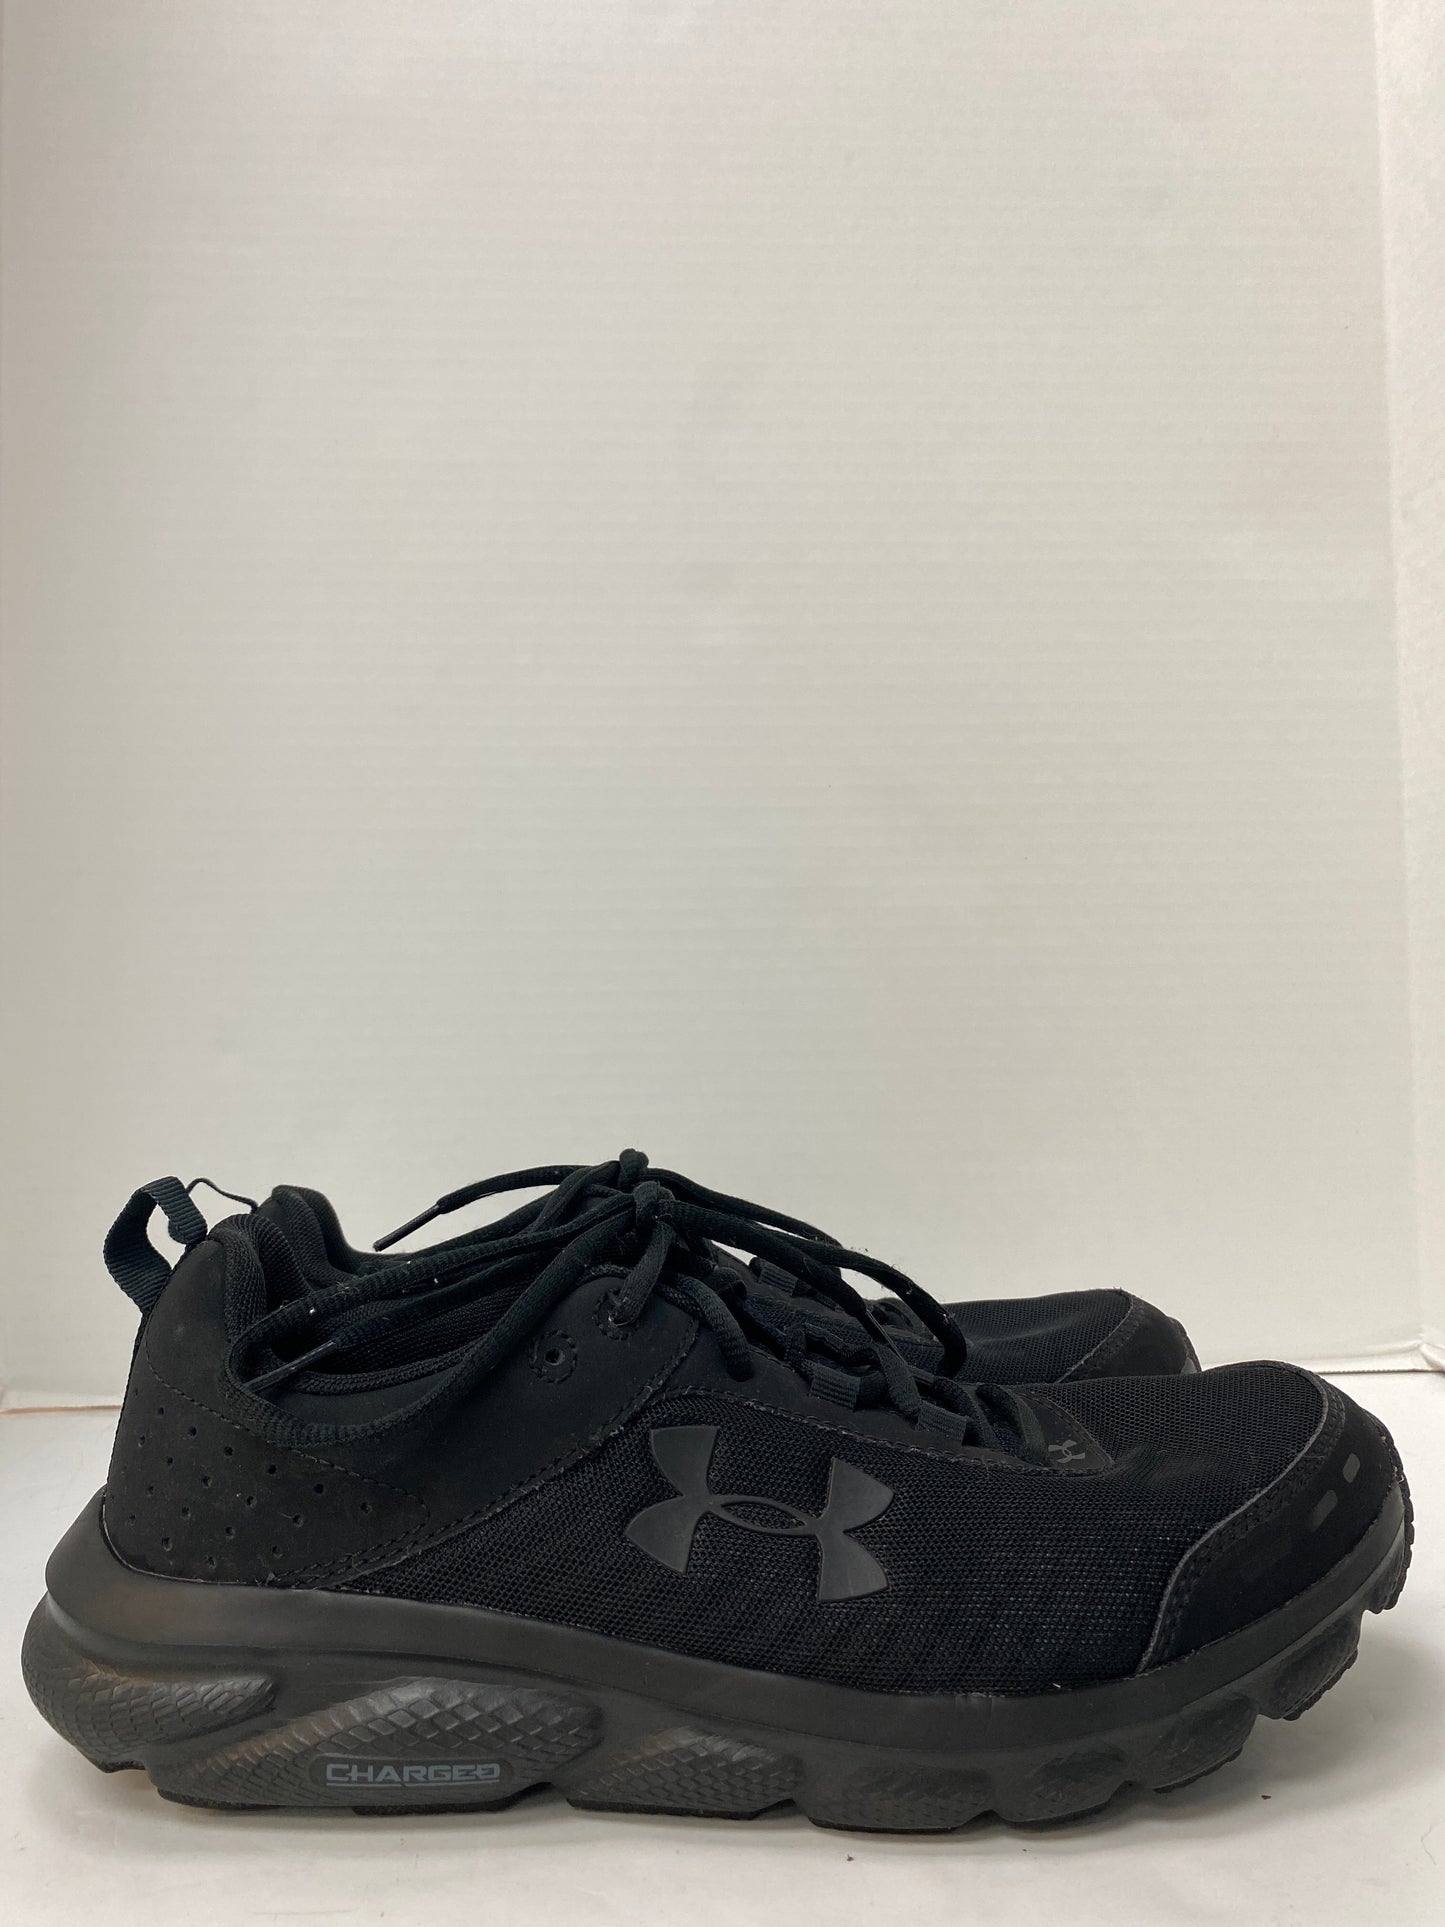 Shoes Athletic By Under Armour  Size: 11